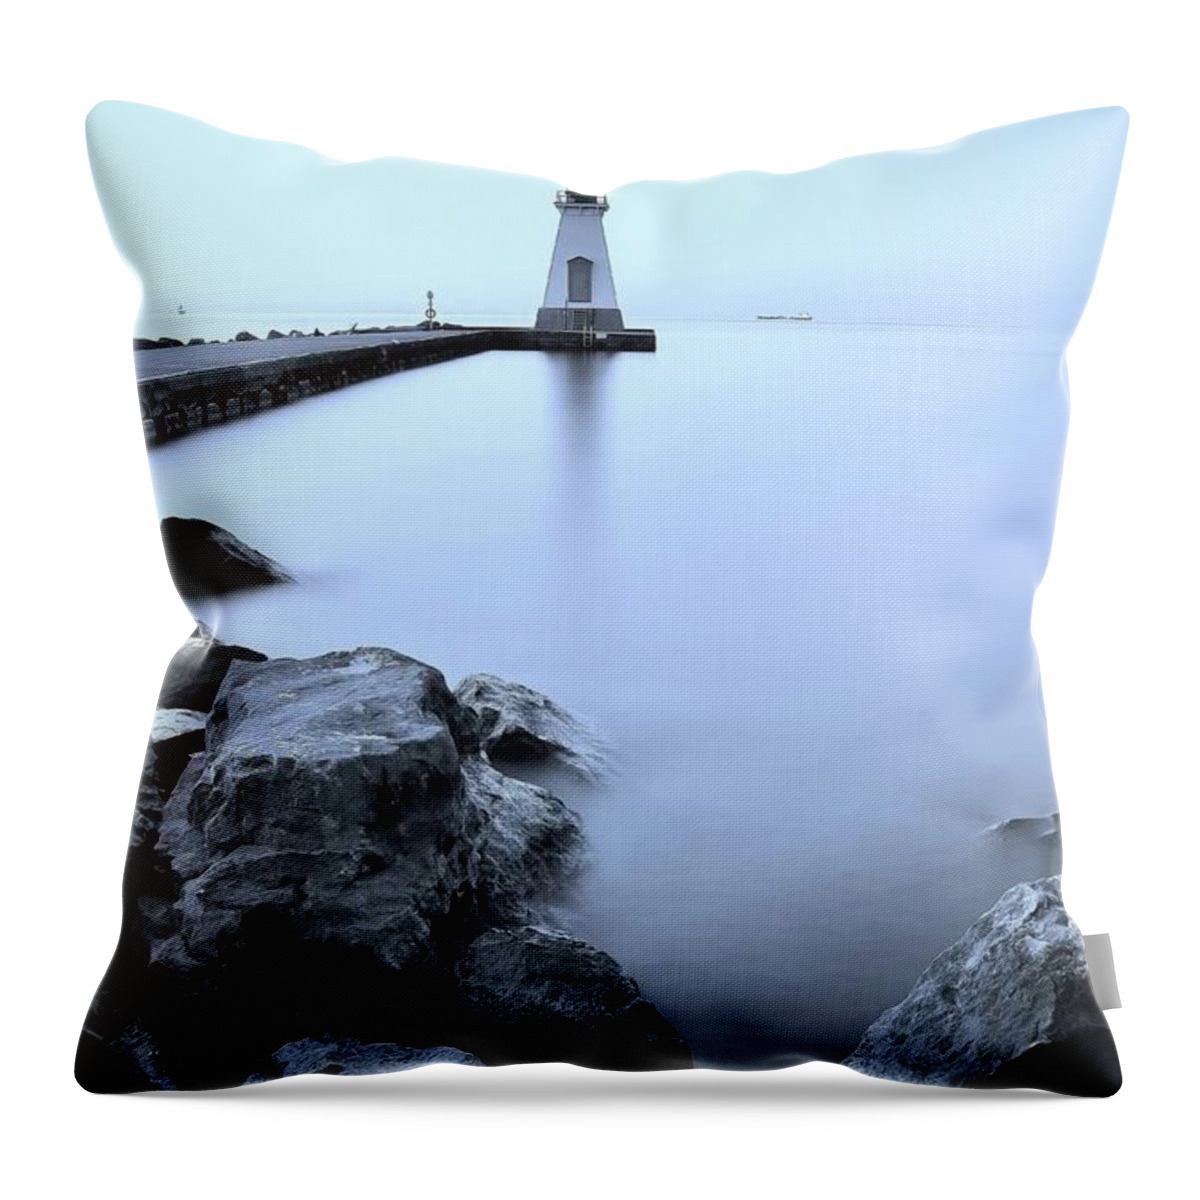 Built Structure Throw Pillow featuring the photograph Port Dalhousie by Rex Montalban Photography